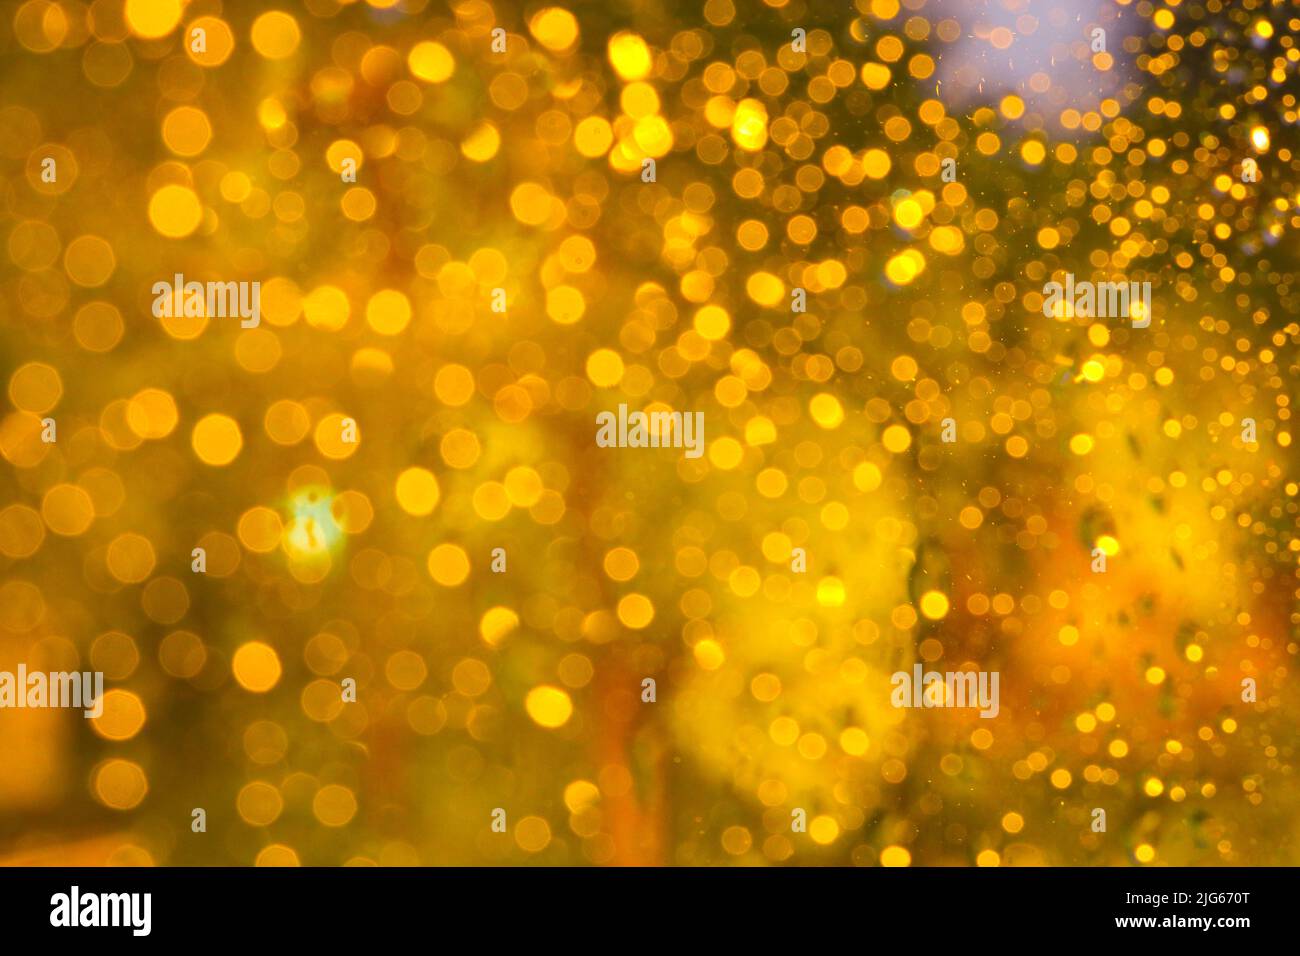 Abstract golden background - yellow bokeh. Stock Photo